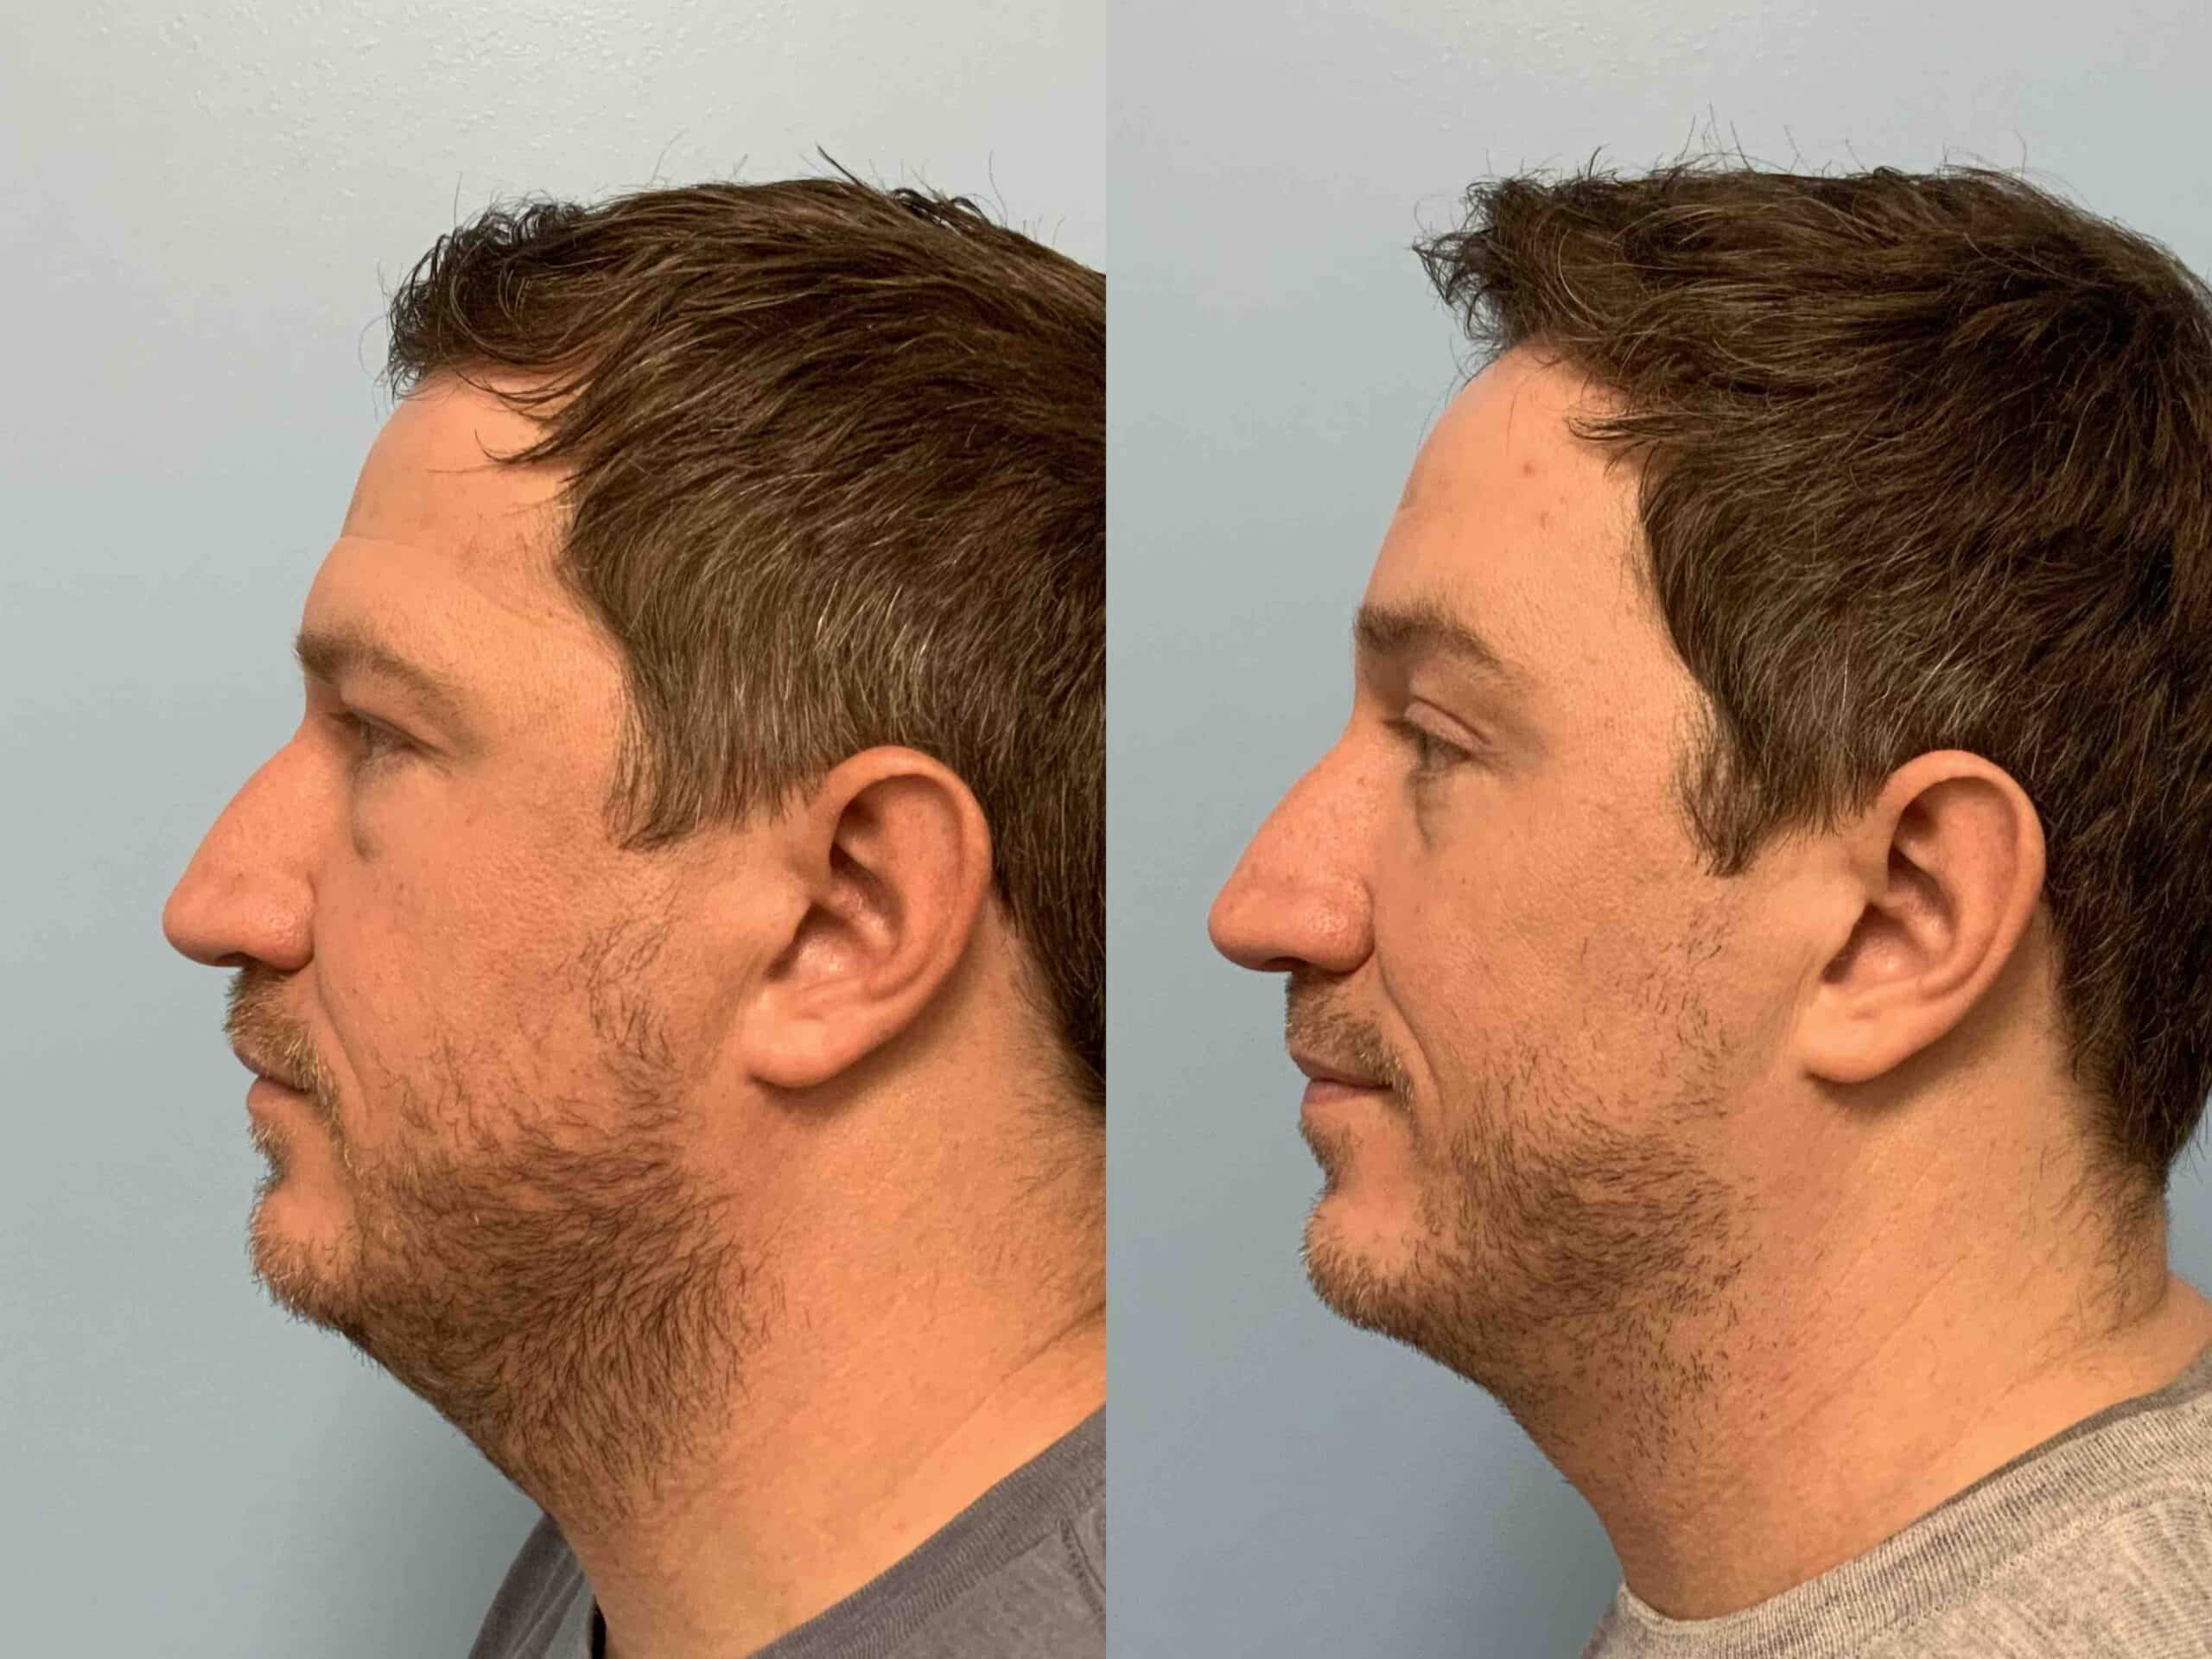 Before and after, 10 mo post op from Lower Blepharoplasty, Canthopexy, Endo Brow lift performed by Dr. Paul Vanek (side view)